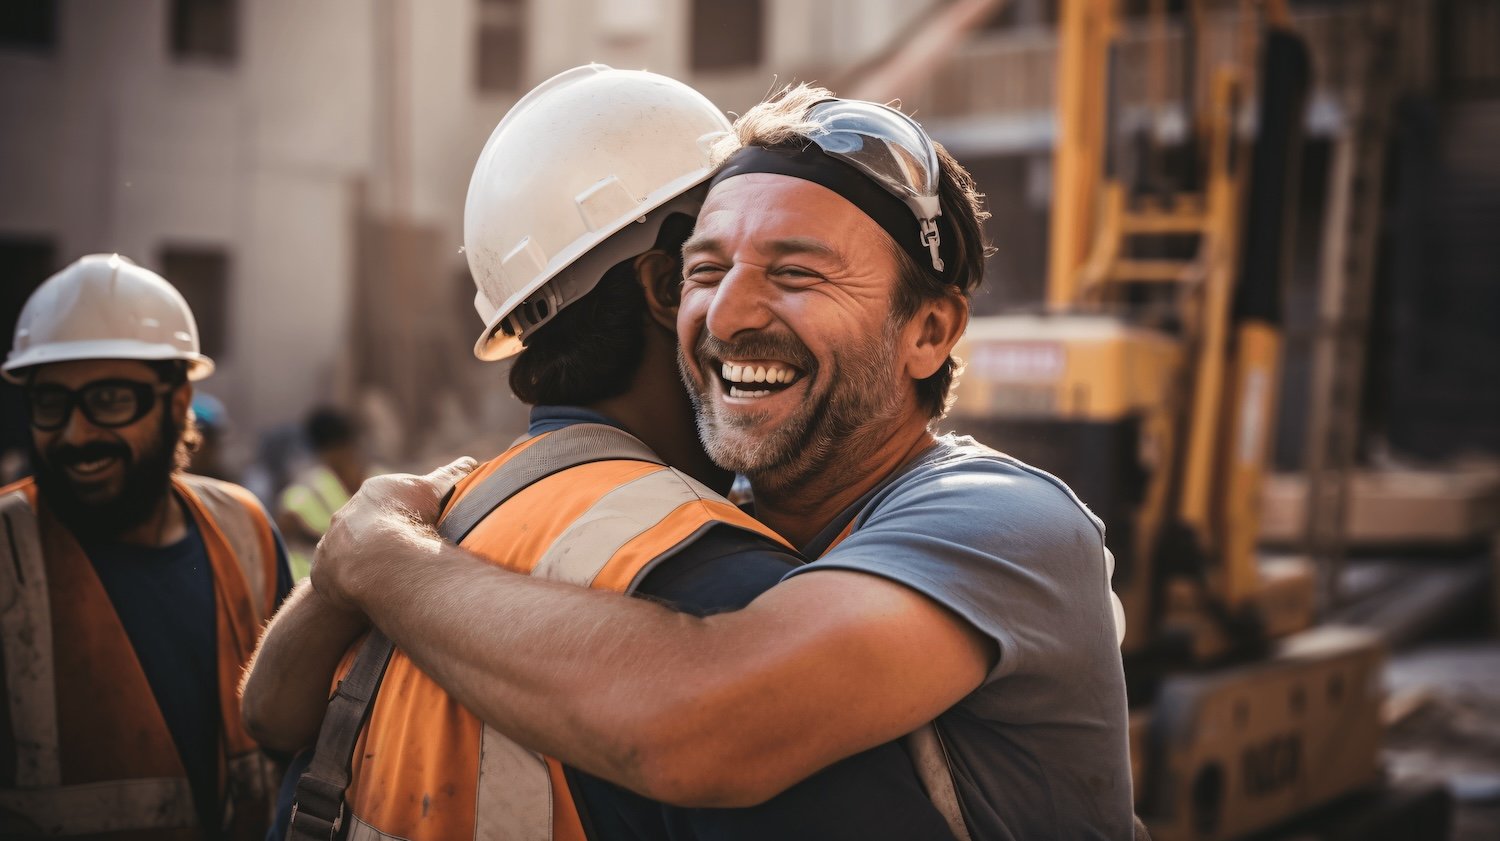 Collaborating construction workers hugging each other